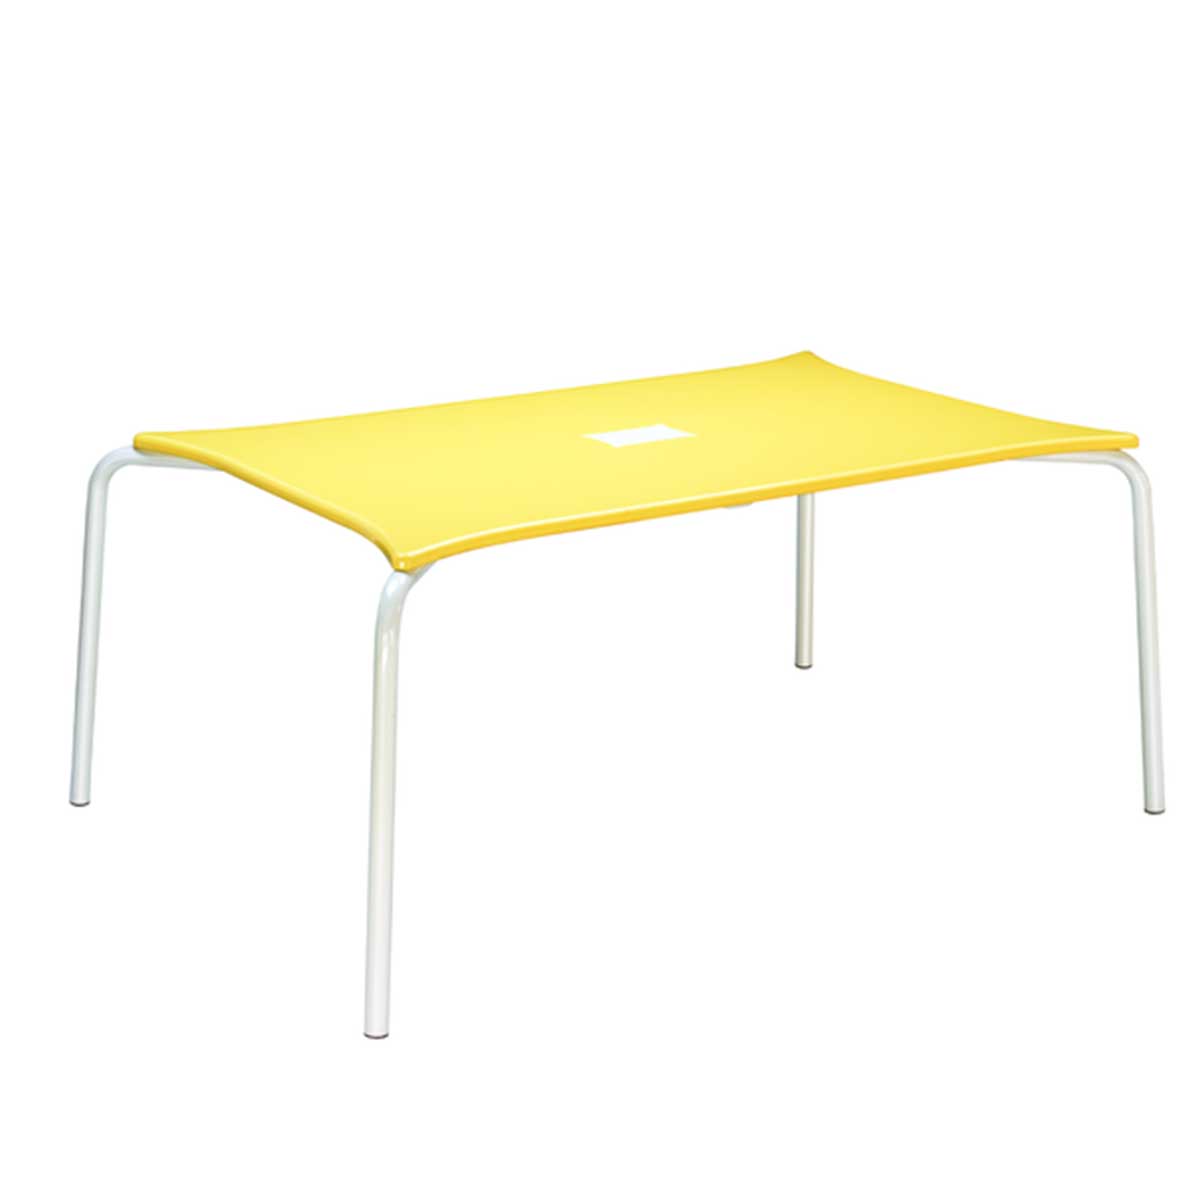 Cafeteria Table Manufacturers, Suppliers in Chhatarpur